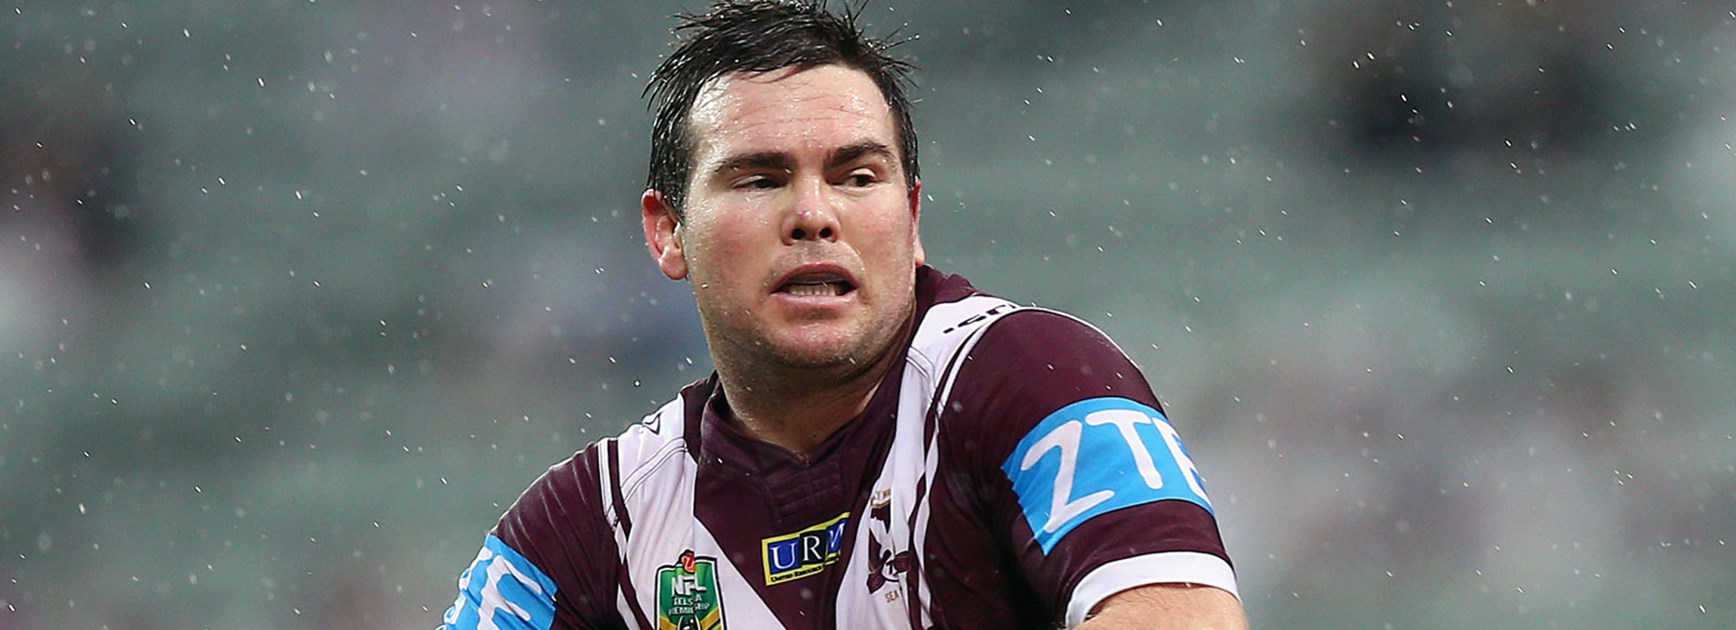 Manly teammates hope to send captain Jamie Lyon out a winner.